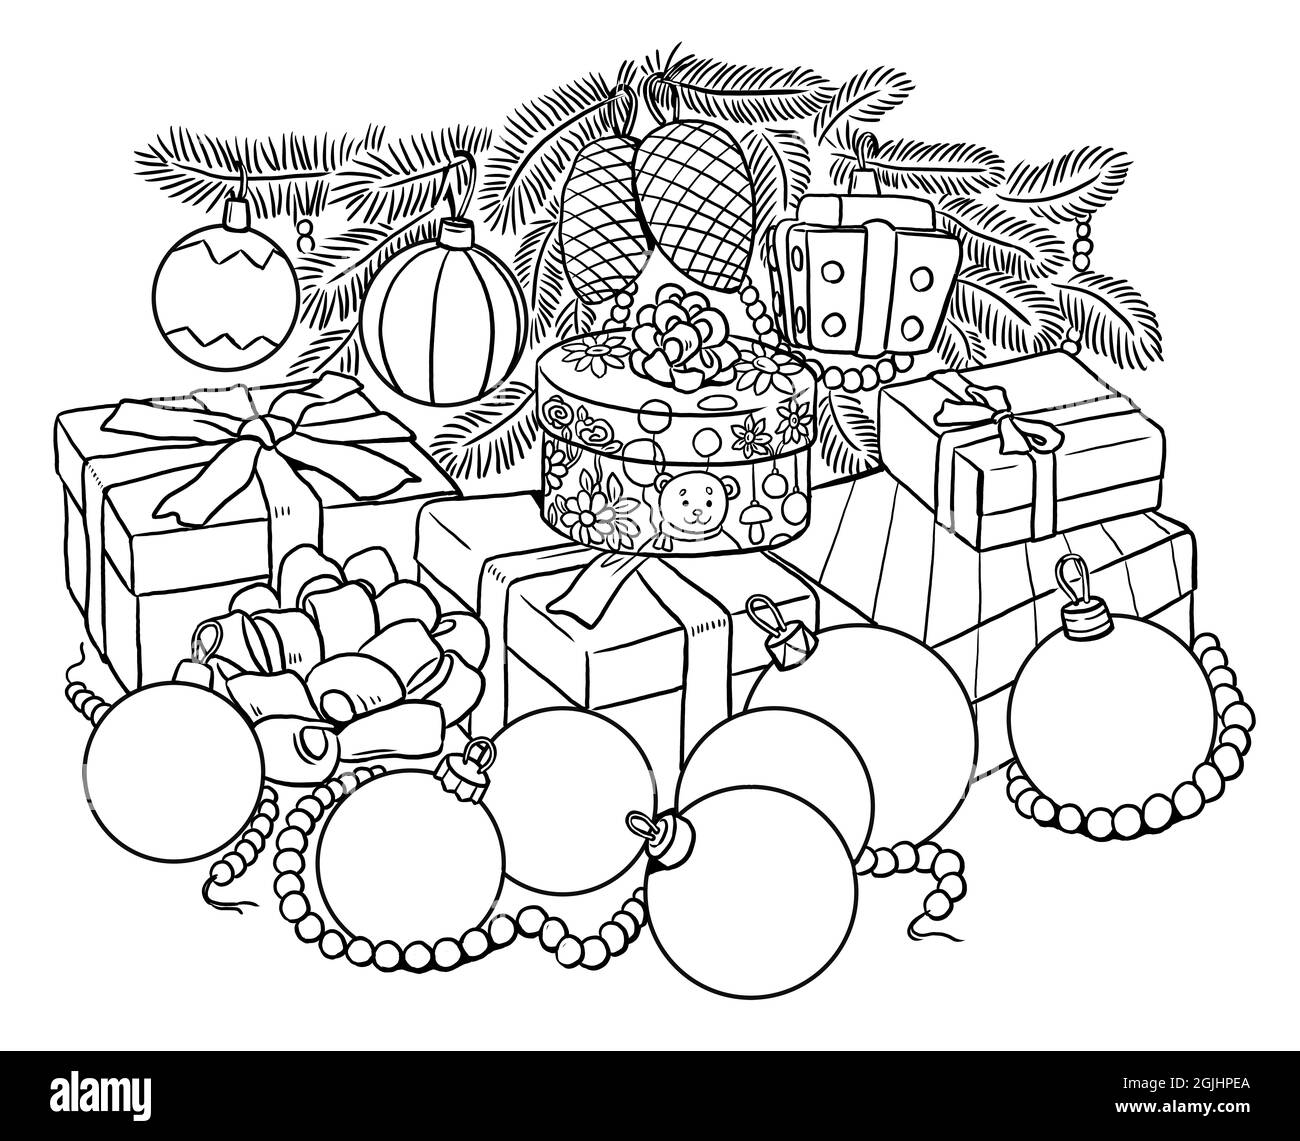 Christmas presents under the Christmas tree. Template for coloring. Stock Photo